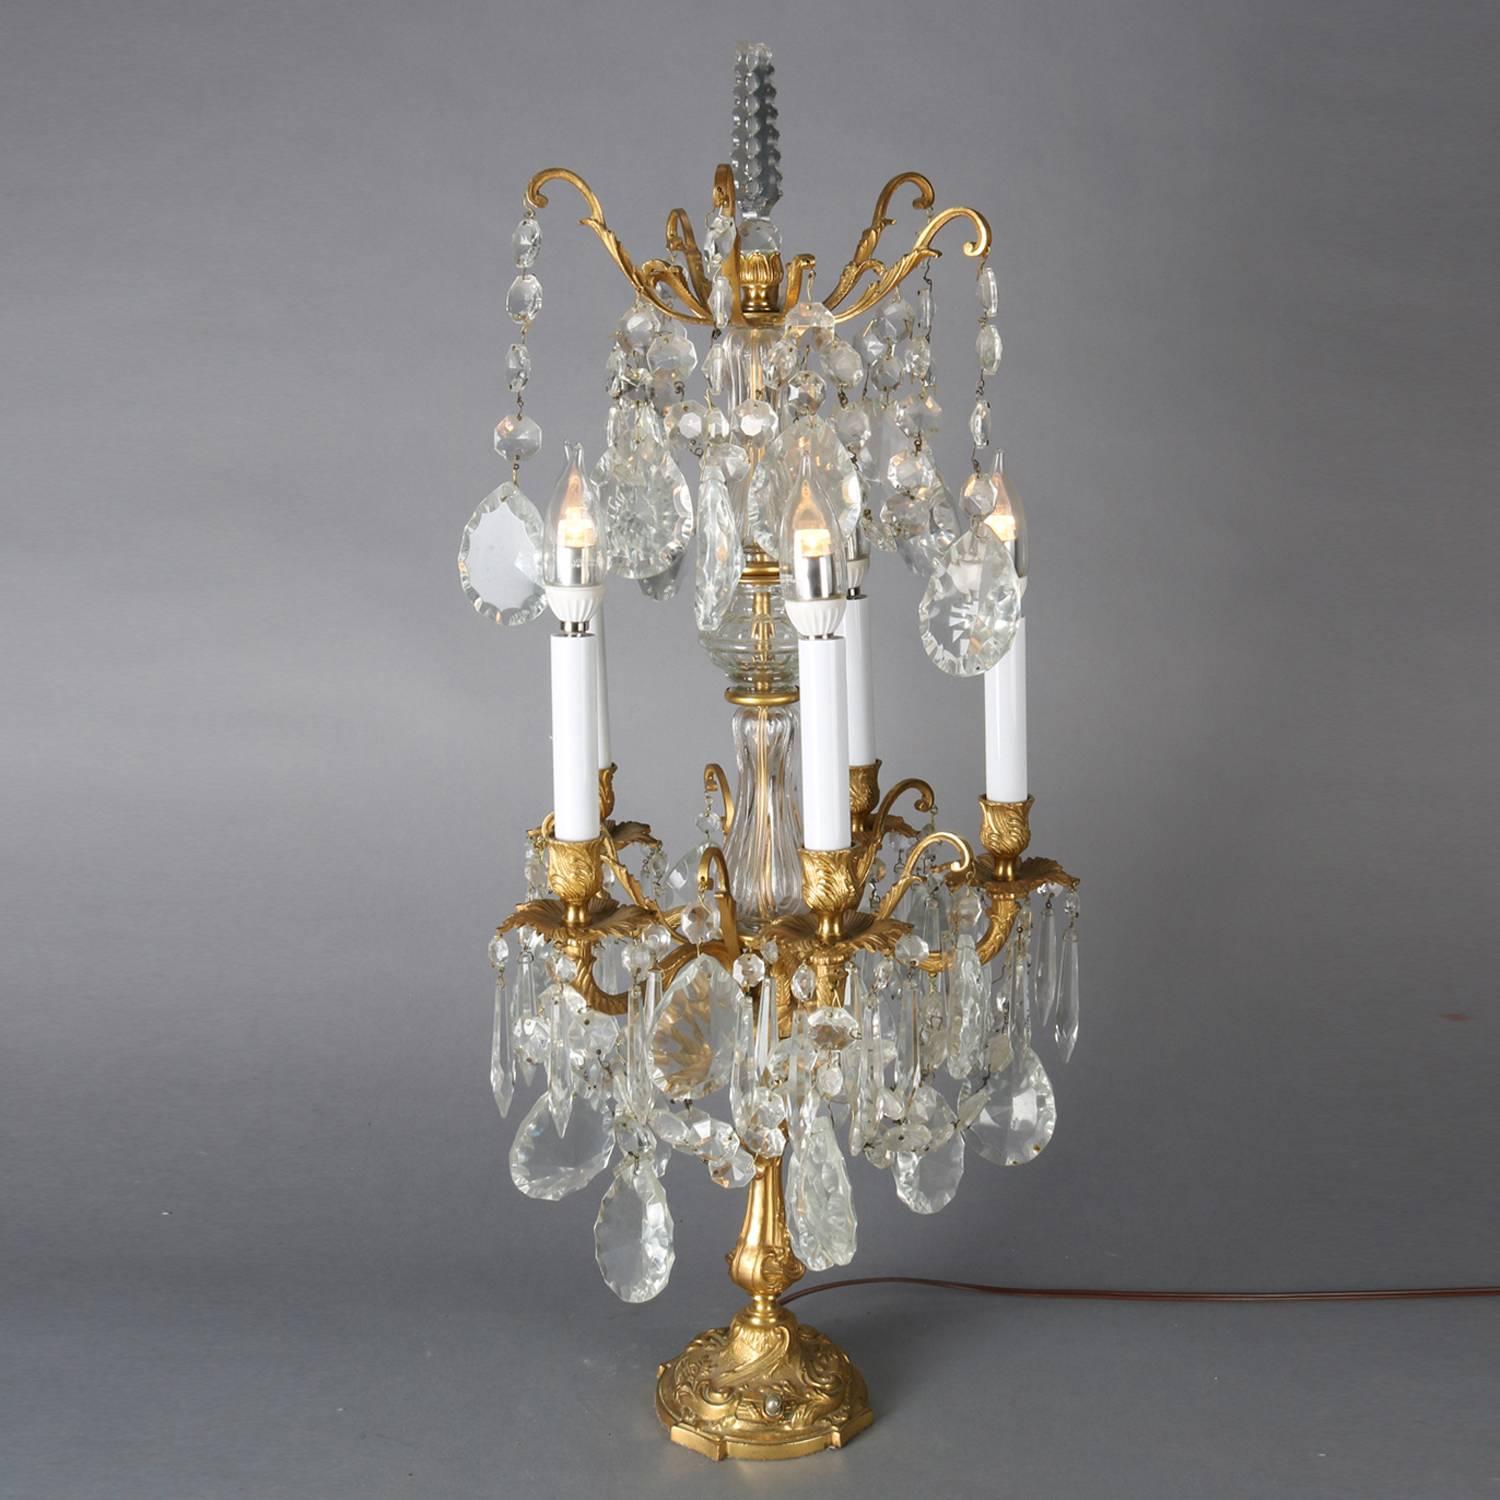 Pair of antique Italian gilt bronze and crystal electrified candelabra lamps features foliate form arms terminating in five candle lights, upper tier also with foliate arms, all-over hanging cut crystal prisms, newly rewired, circa